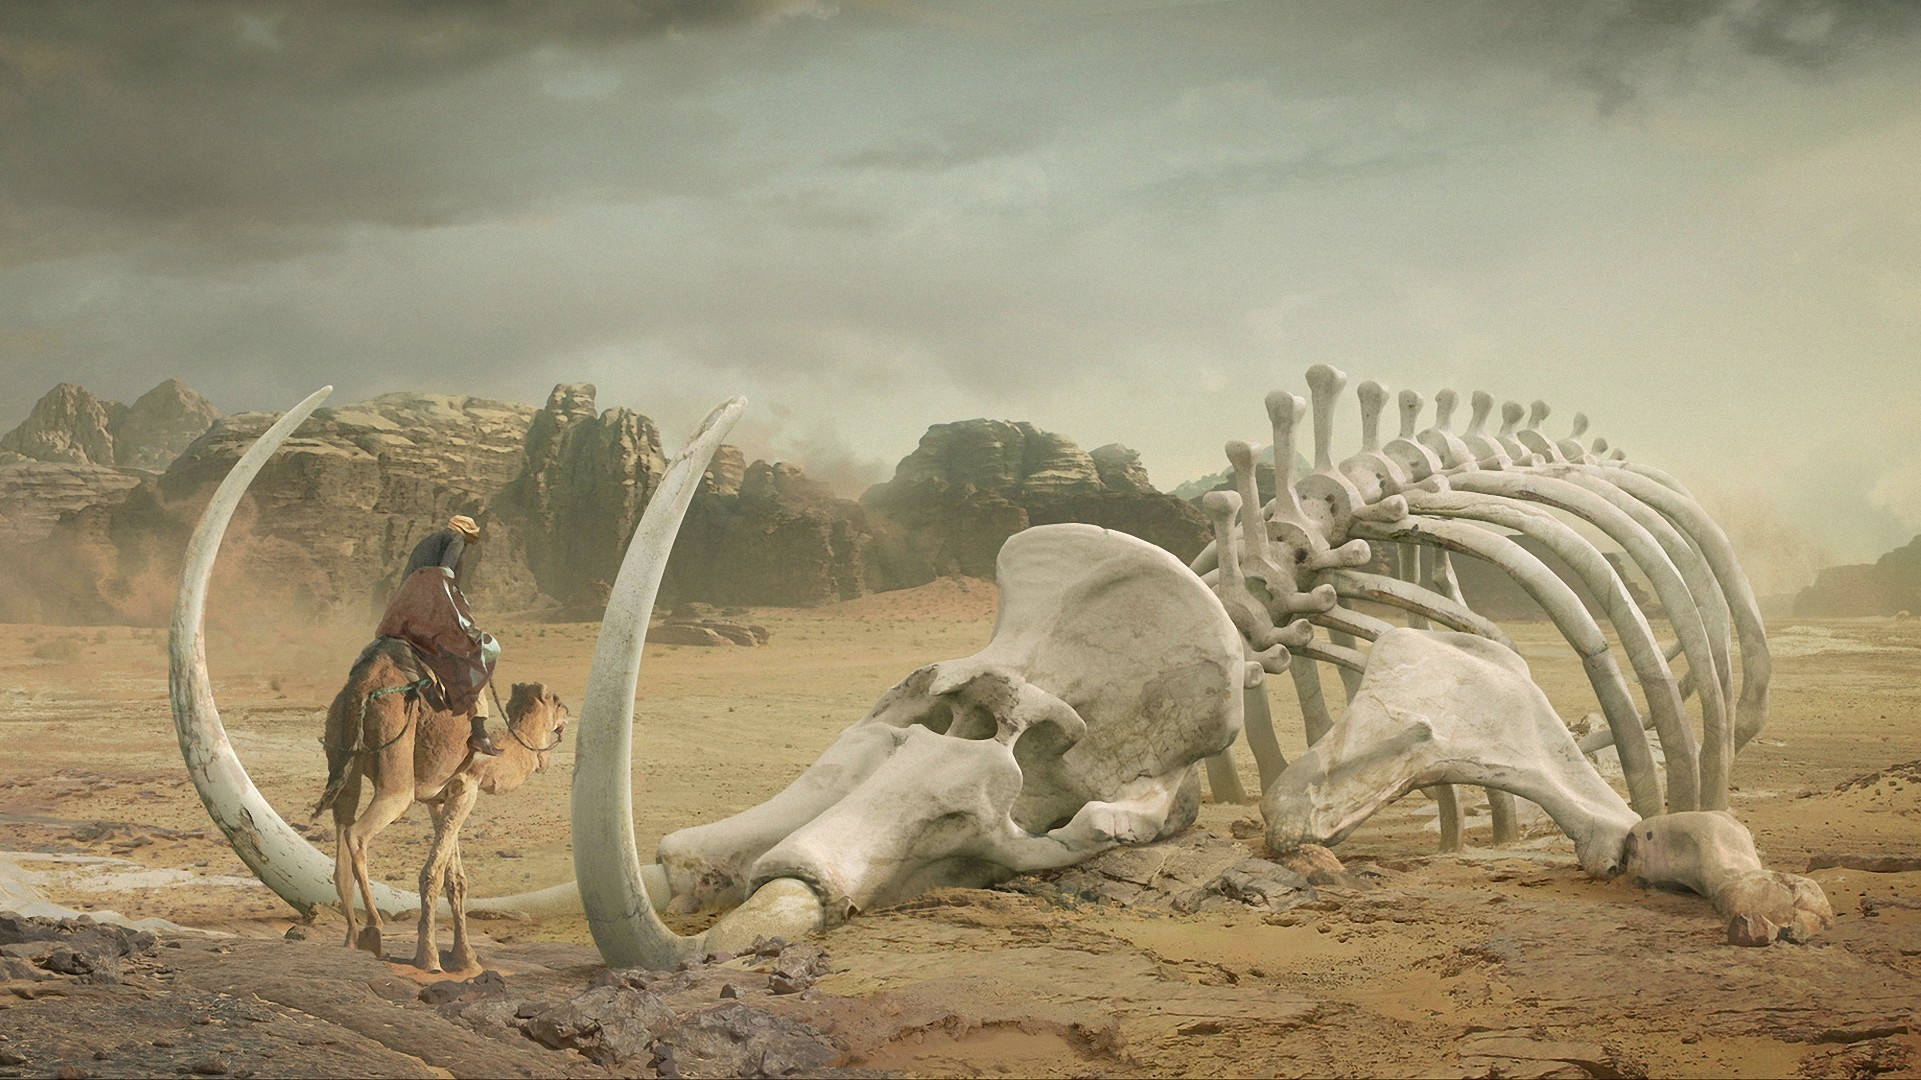 Man On His Camel Looking At The Giant Bones Of A Mammoth